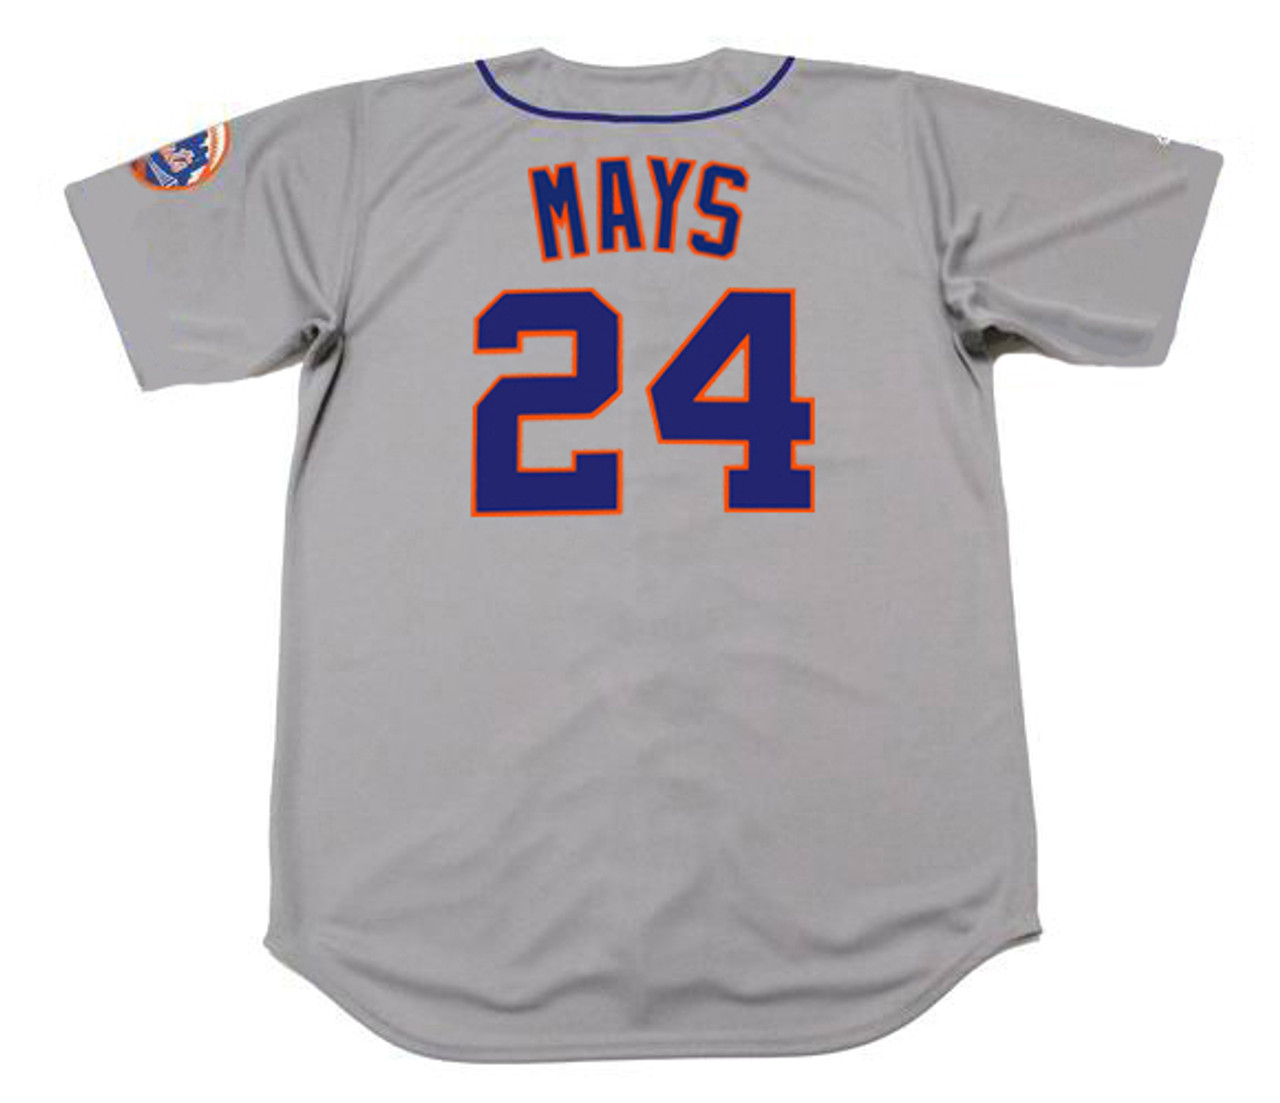 New York Mets Mickey Mouse x New York Mets Baseball Jersey W –